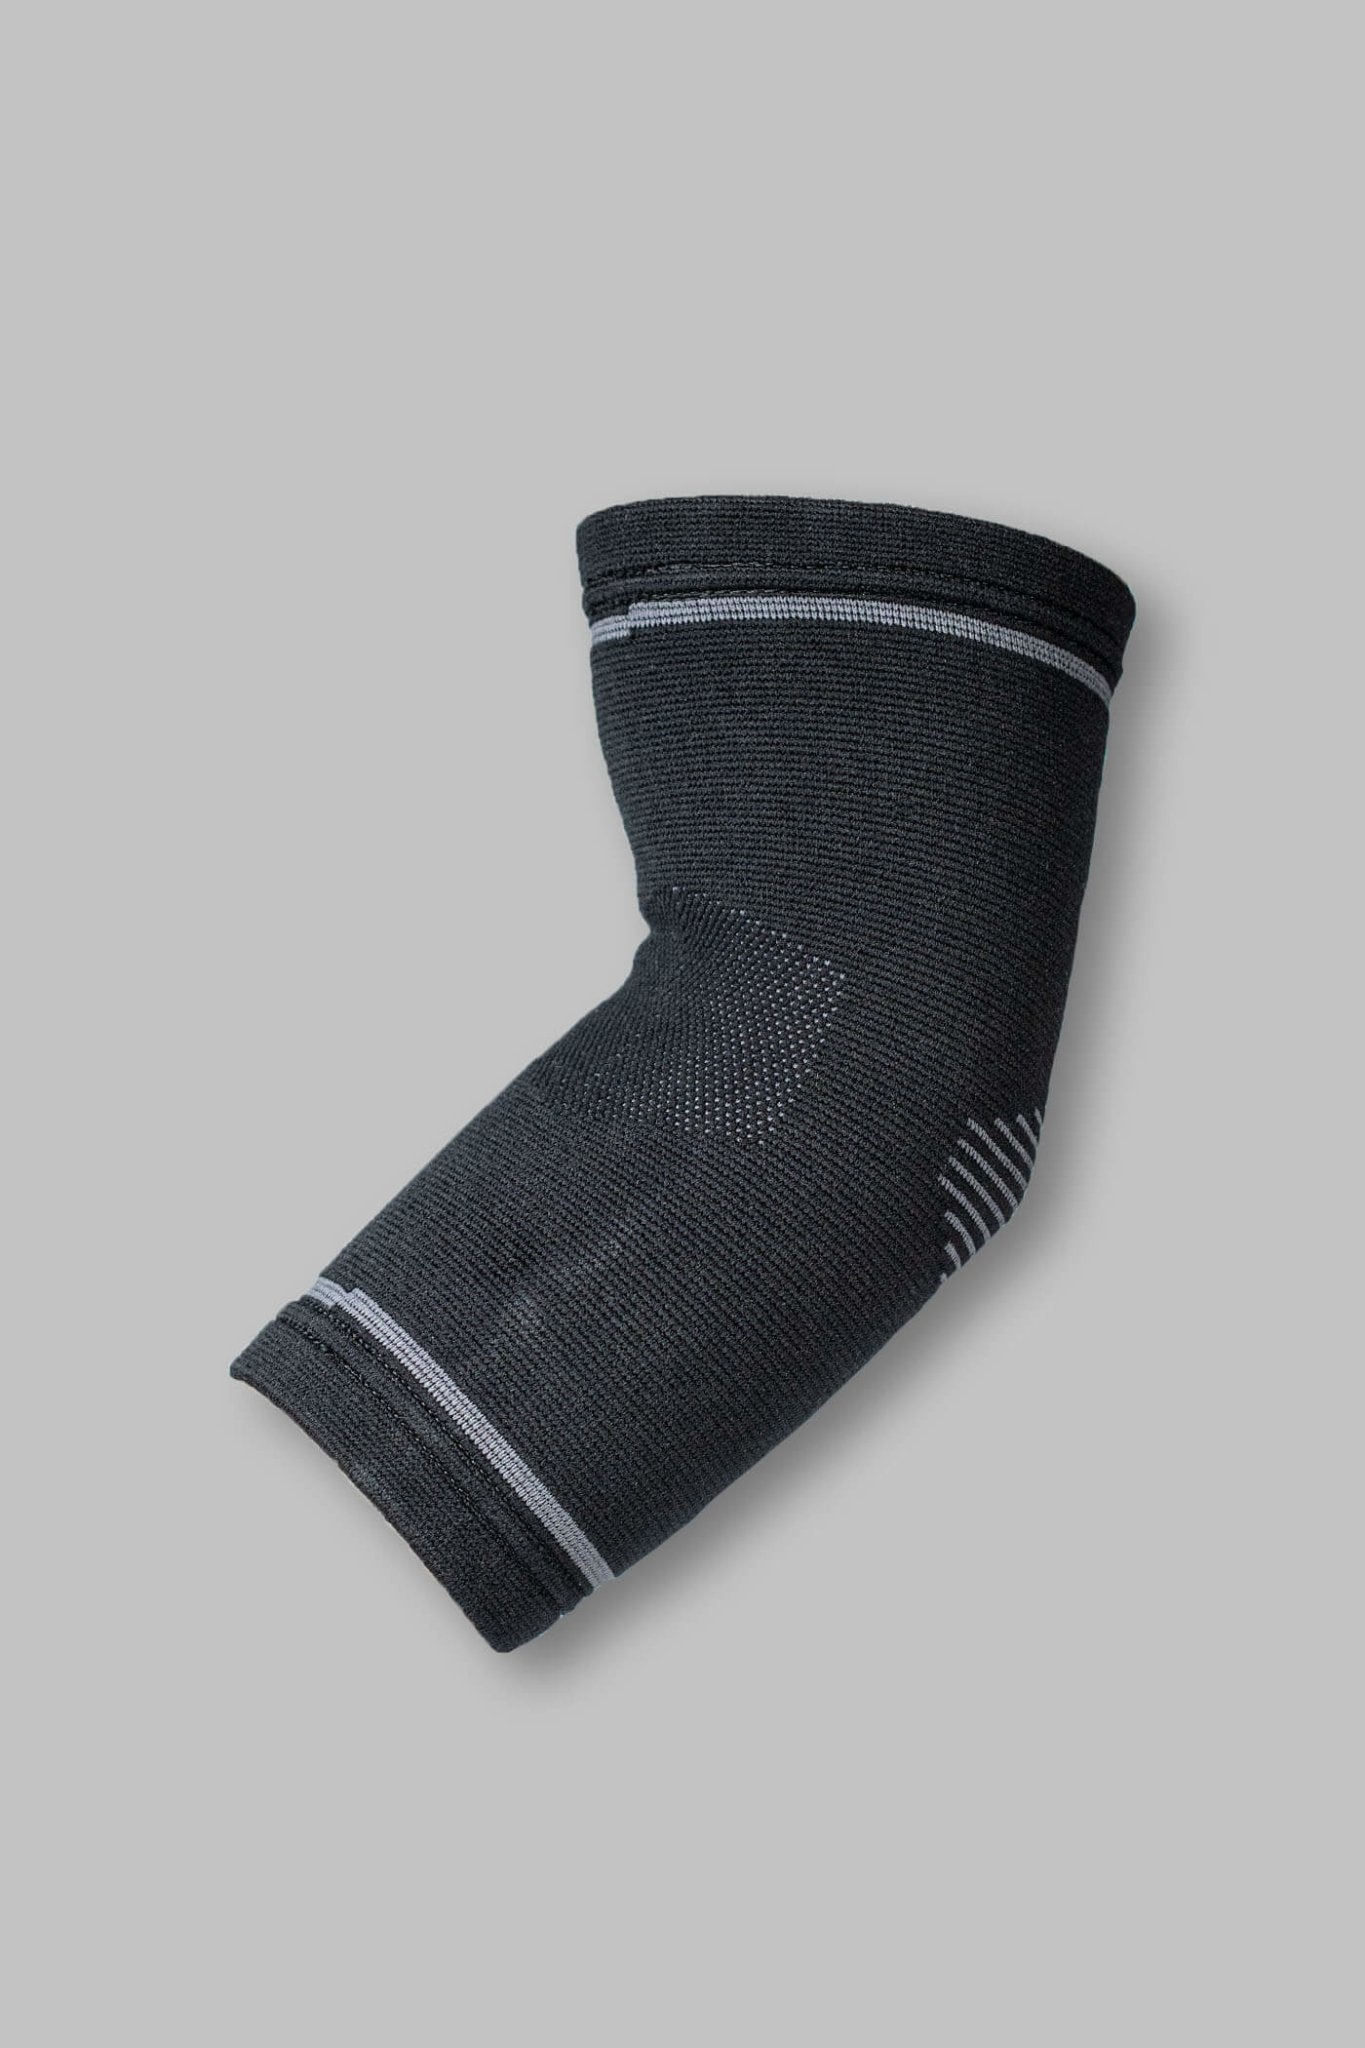 Elbow Support in Black - Gain The Edge EU